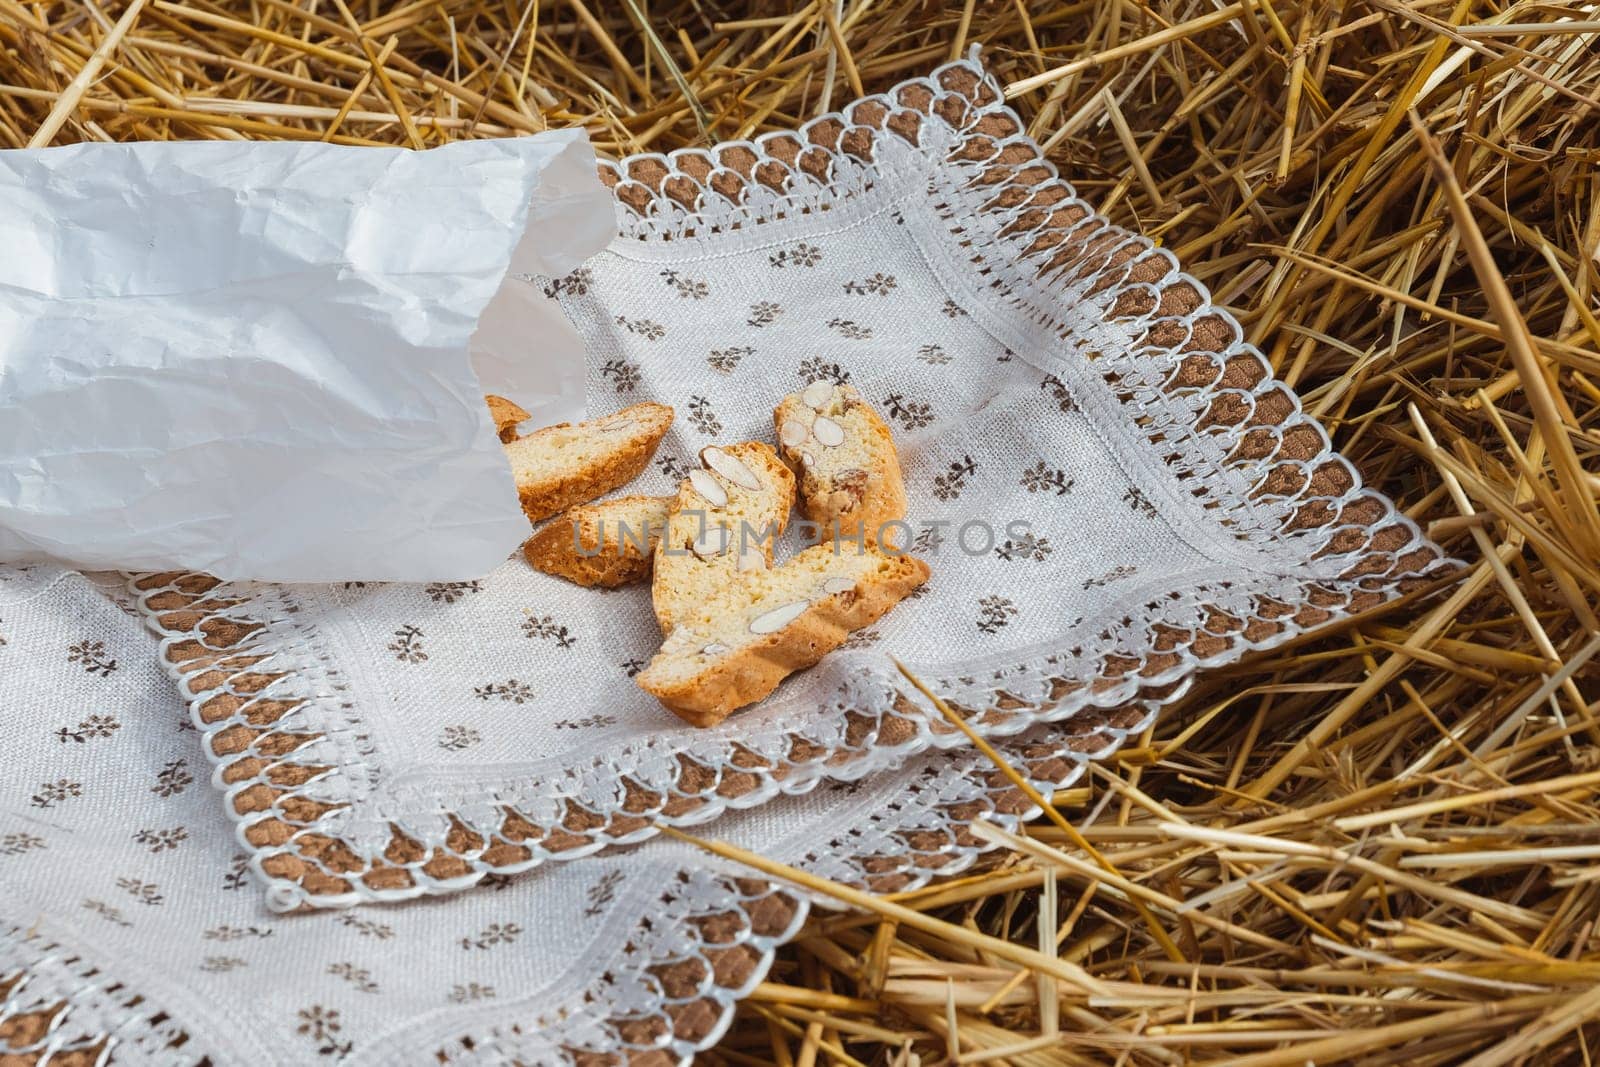 Almond cookies crackers with pieces of nuts fell out of a paper bag on a napkin lying on the straw by ElenaNEL